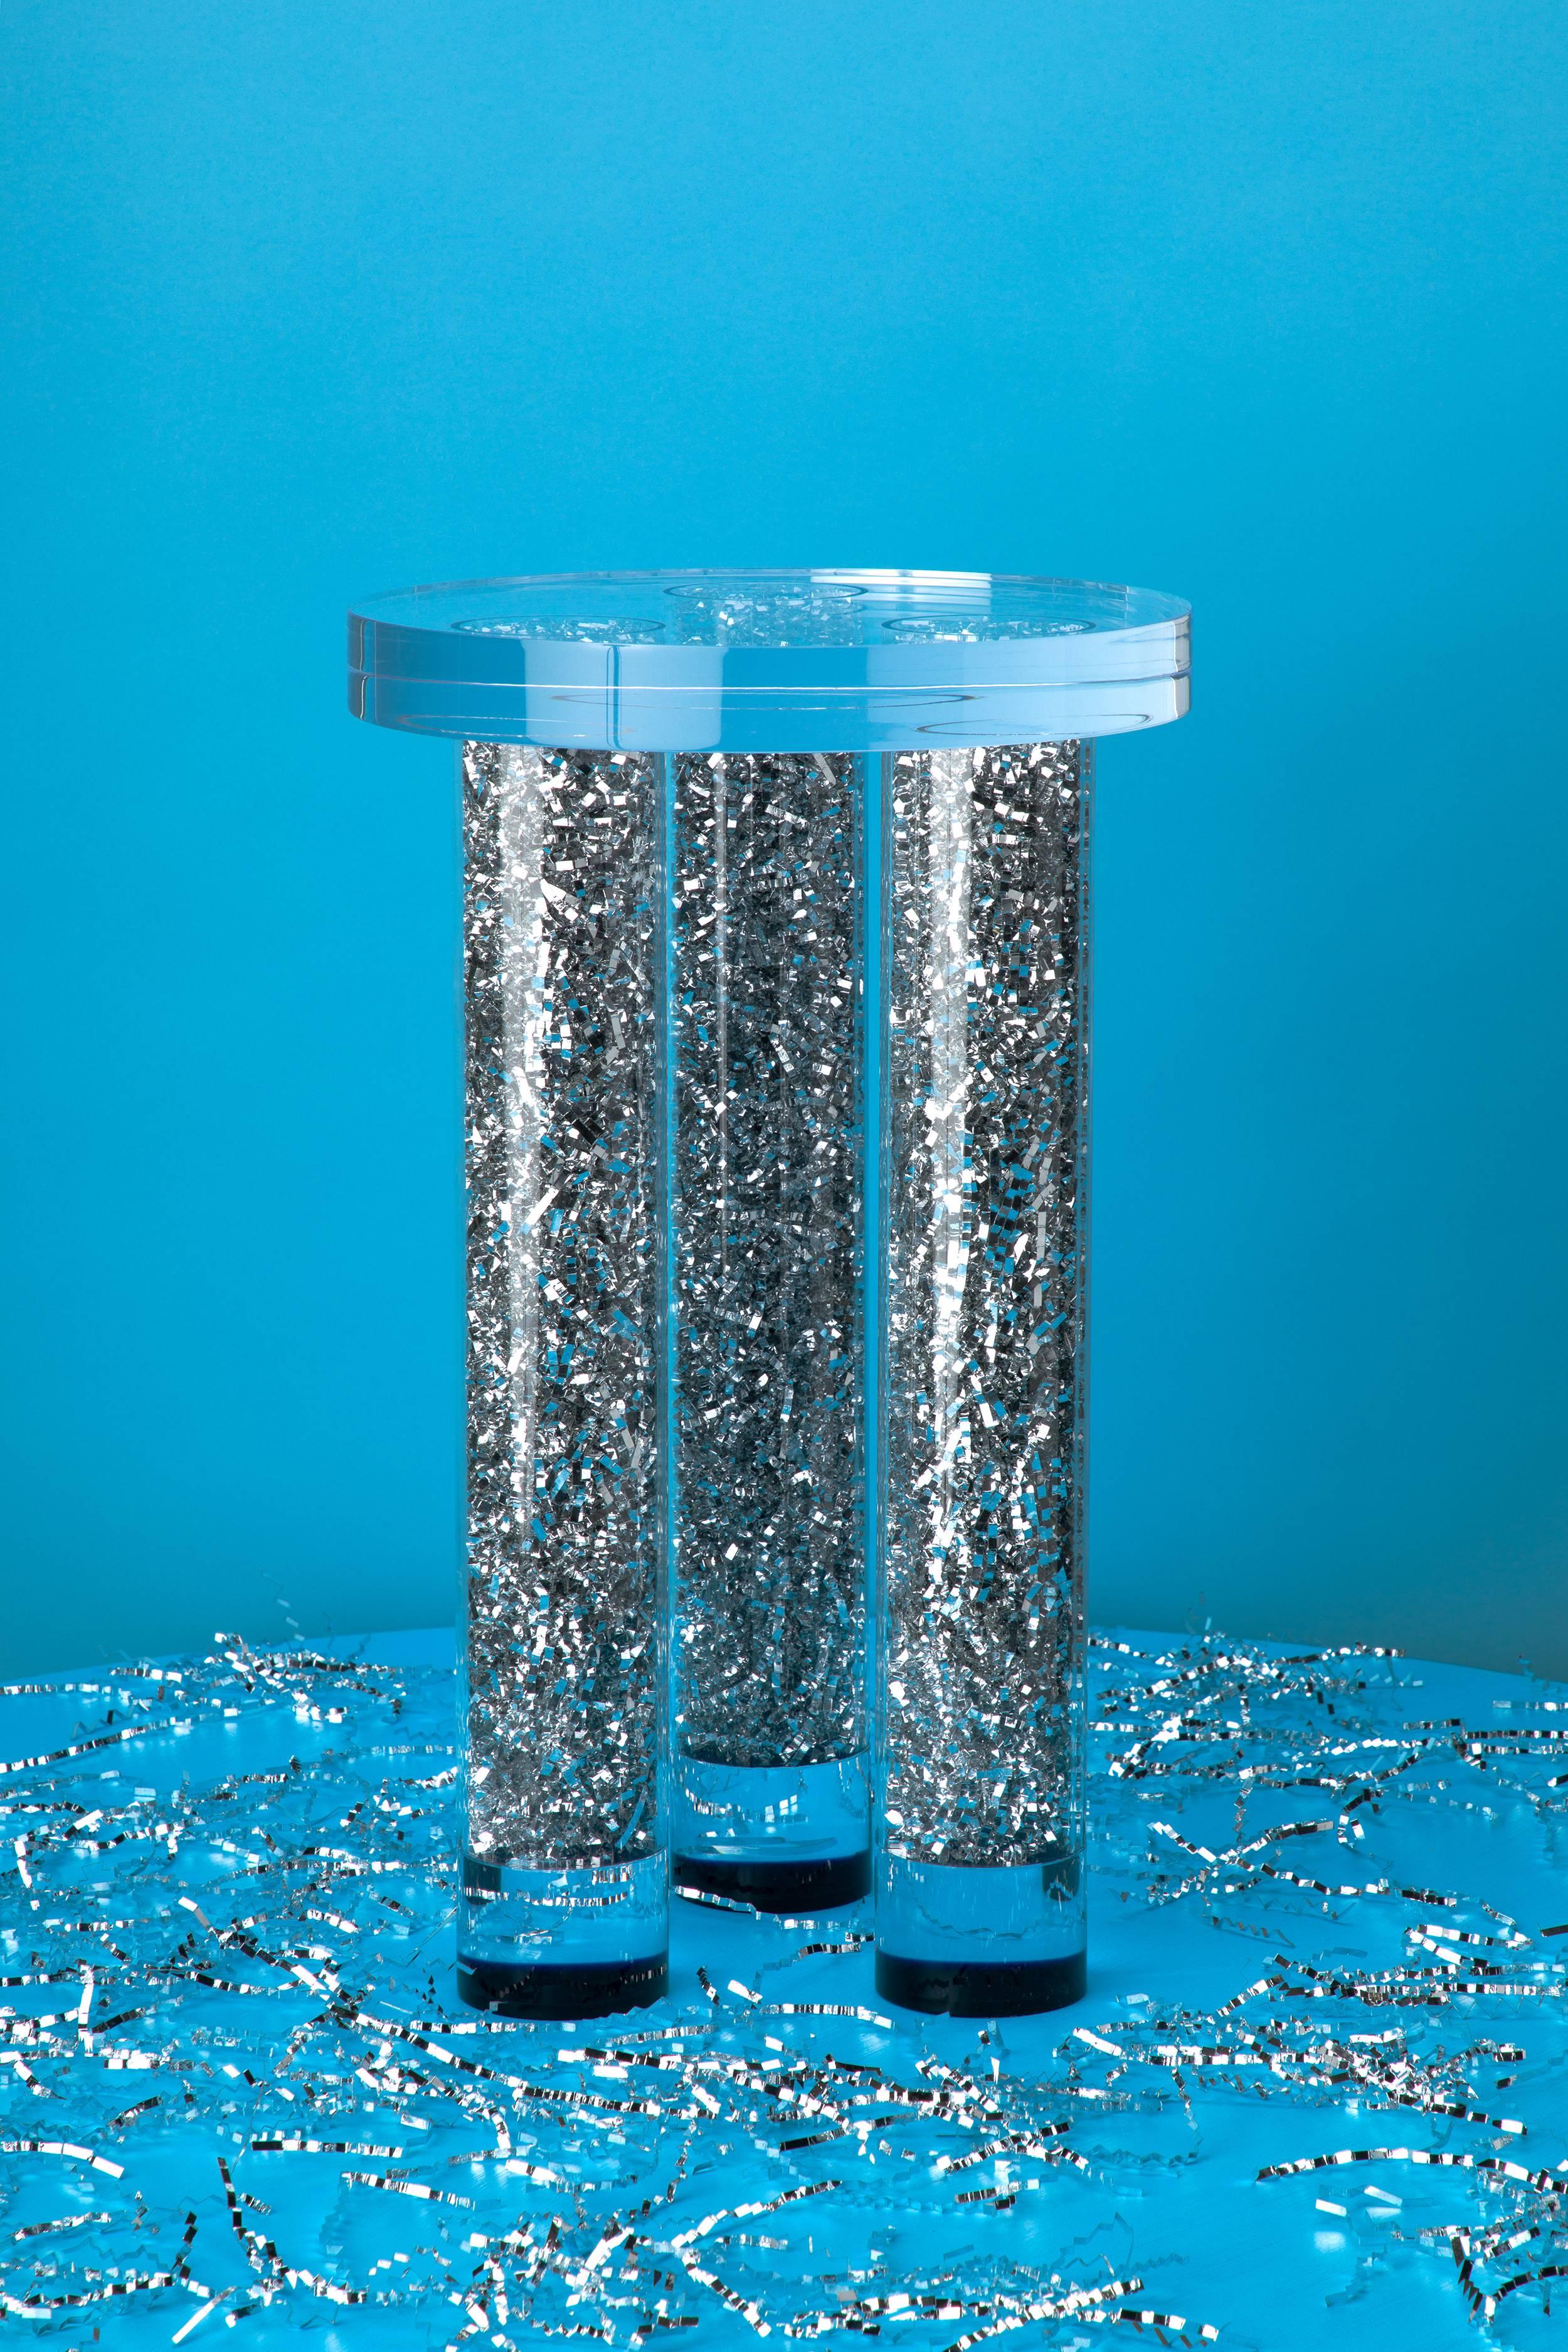 With the Party On Table, the party never has to stop. The table features a chunky clear acrylic top supported by acrylic tube legs that have been stuffed with silver metallic crinkle paper - a material that is often used for table decoration at